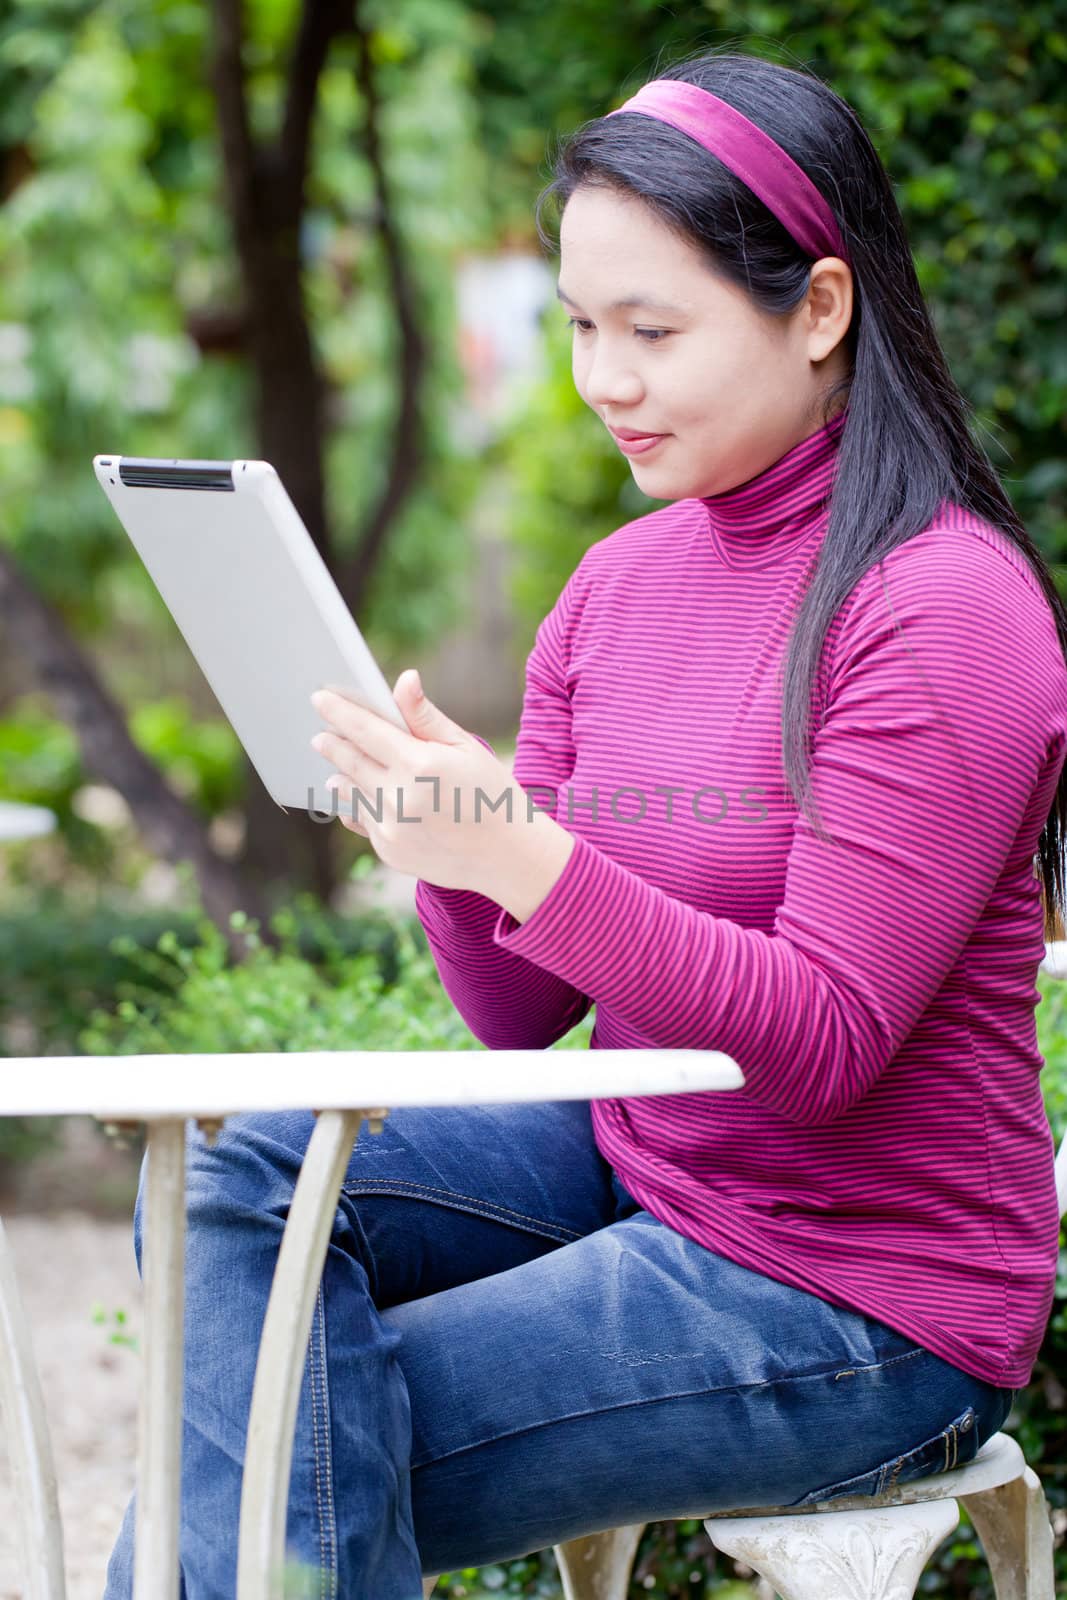 Smiling young woman using tablet PC for working in garden